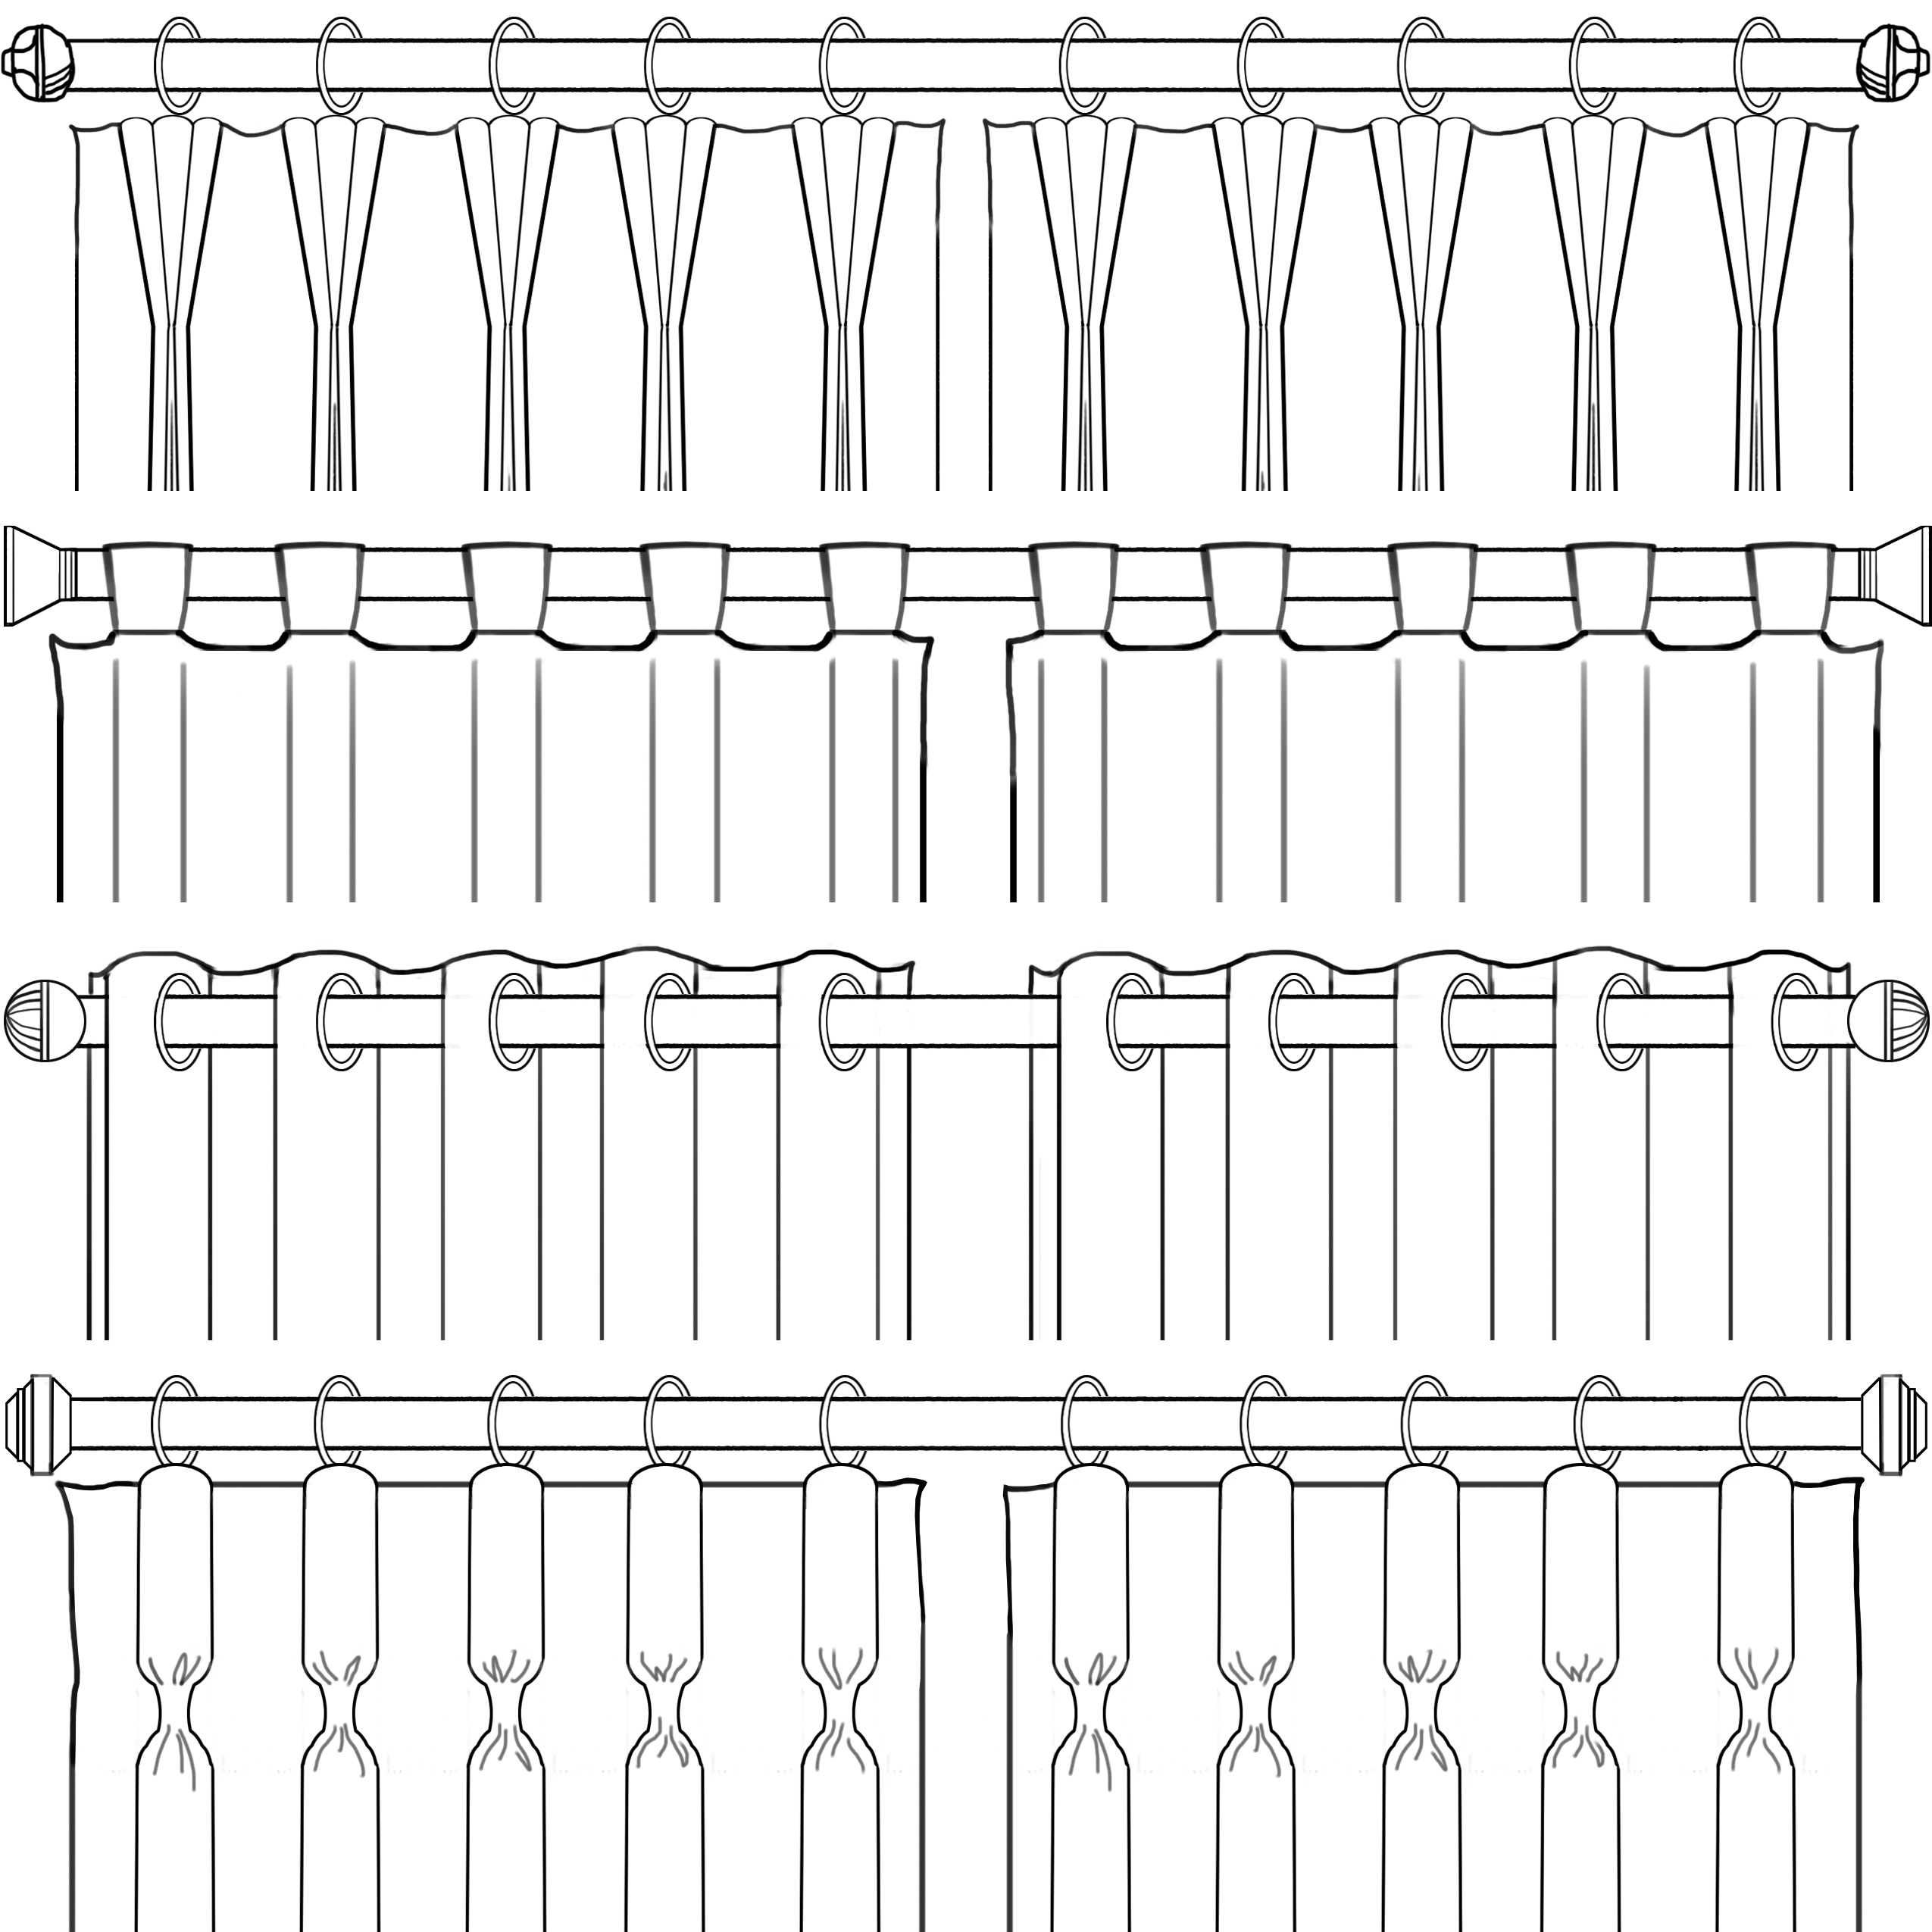 How to choose curtain headings